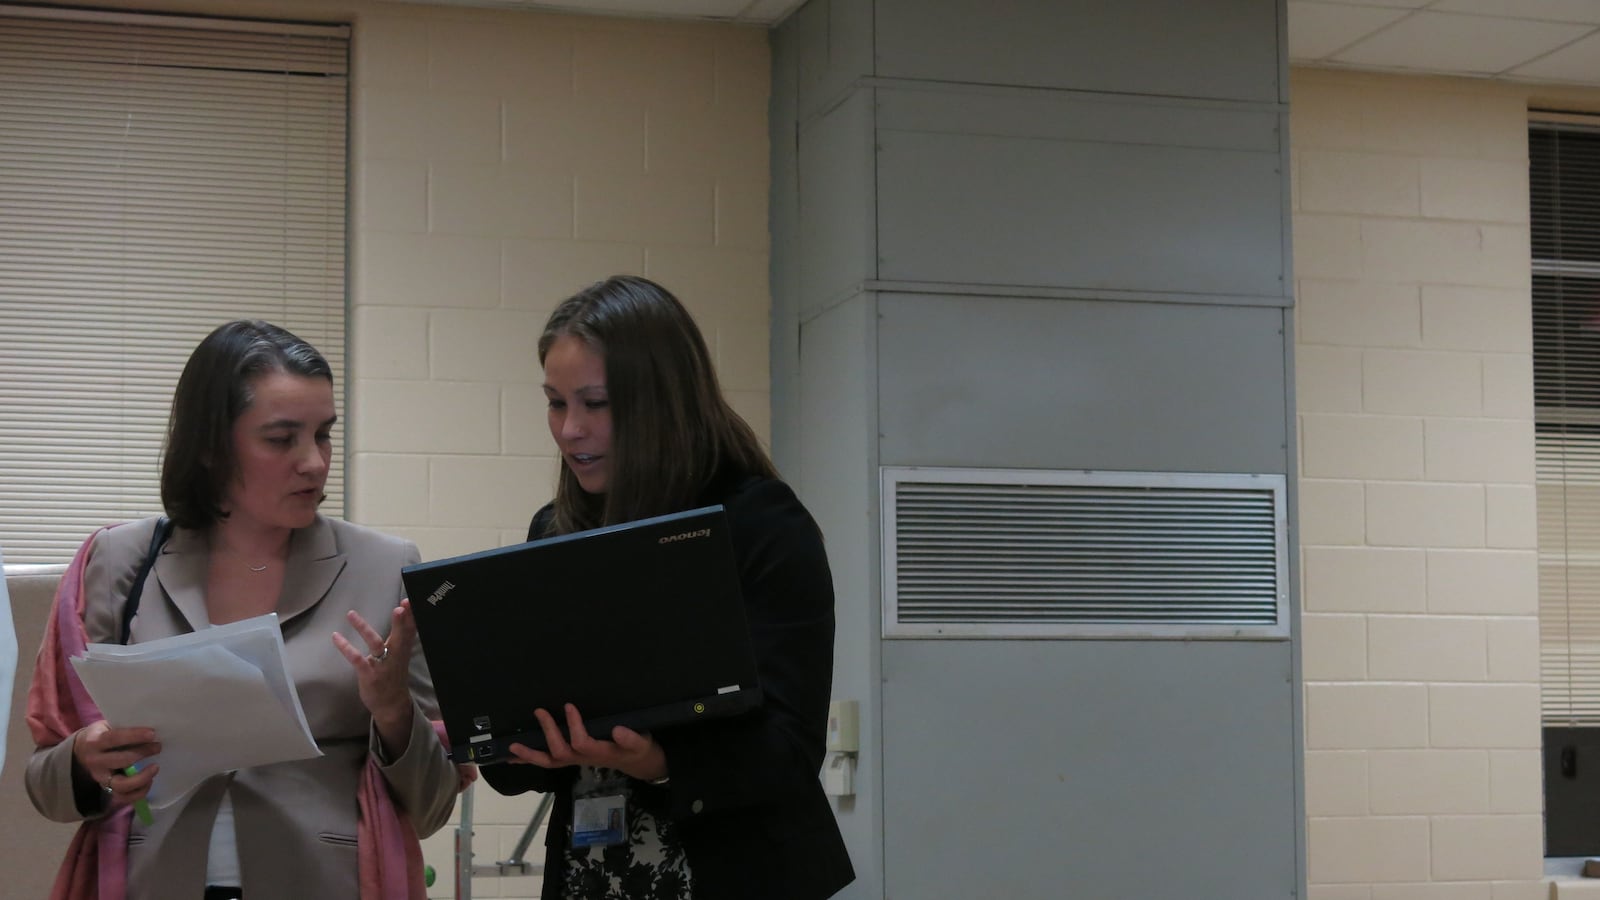 Board member Amy Frogge (left) and an ASD official discuss data on the sidelines of the meeting.